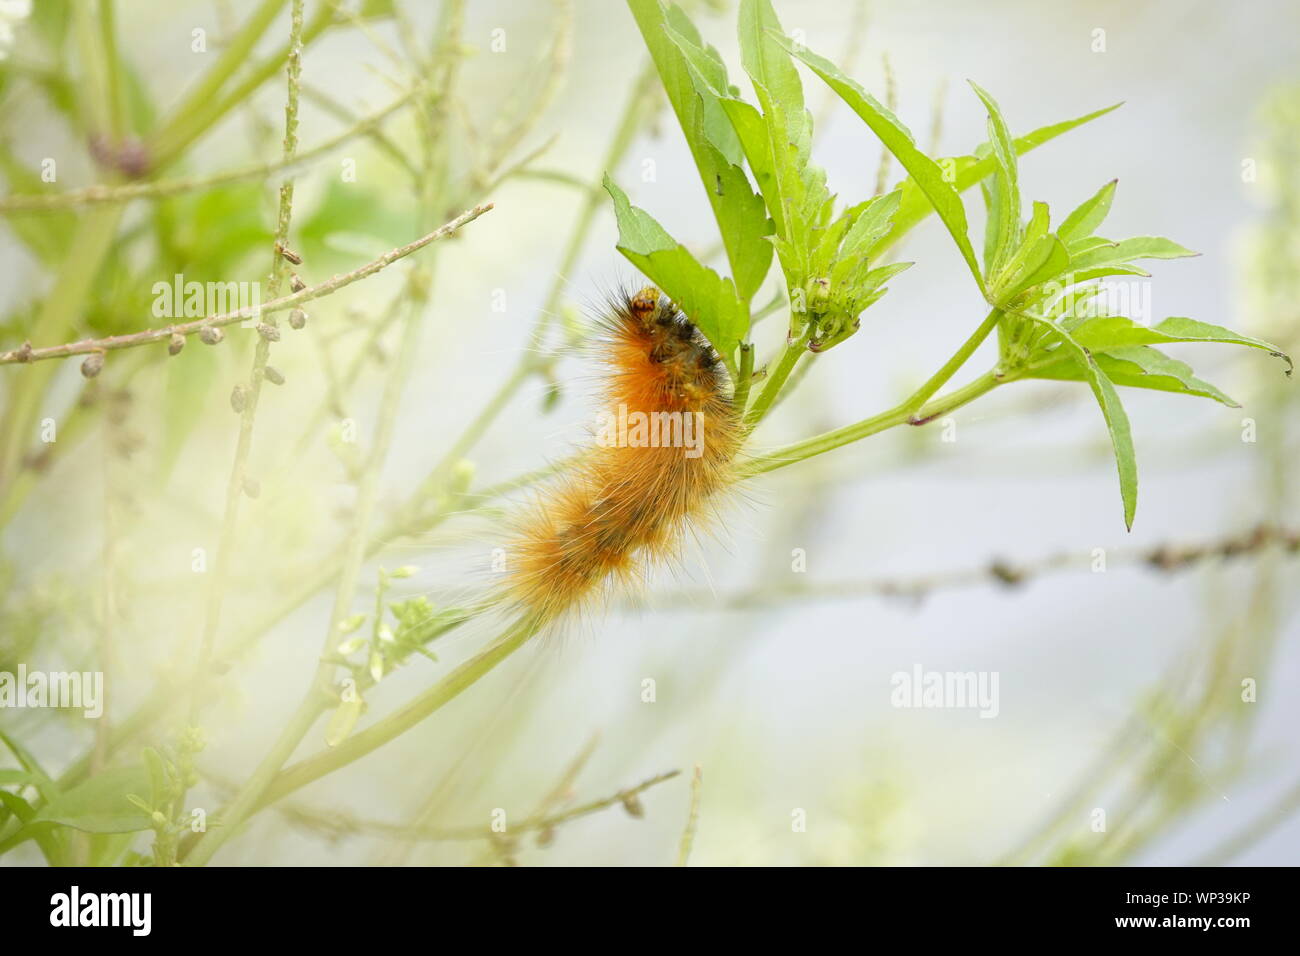 caterpillar, insect, nature, green, animal, macro, butterfly, wildlife, bug, closeup, larva, white, background, yellow, plant, moth, leaf, isola Stock Photo - Alamy